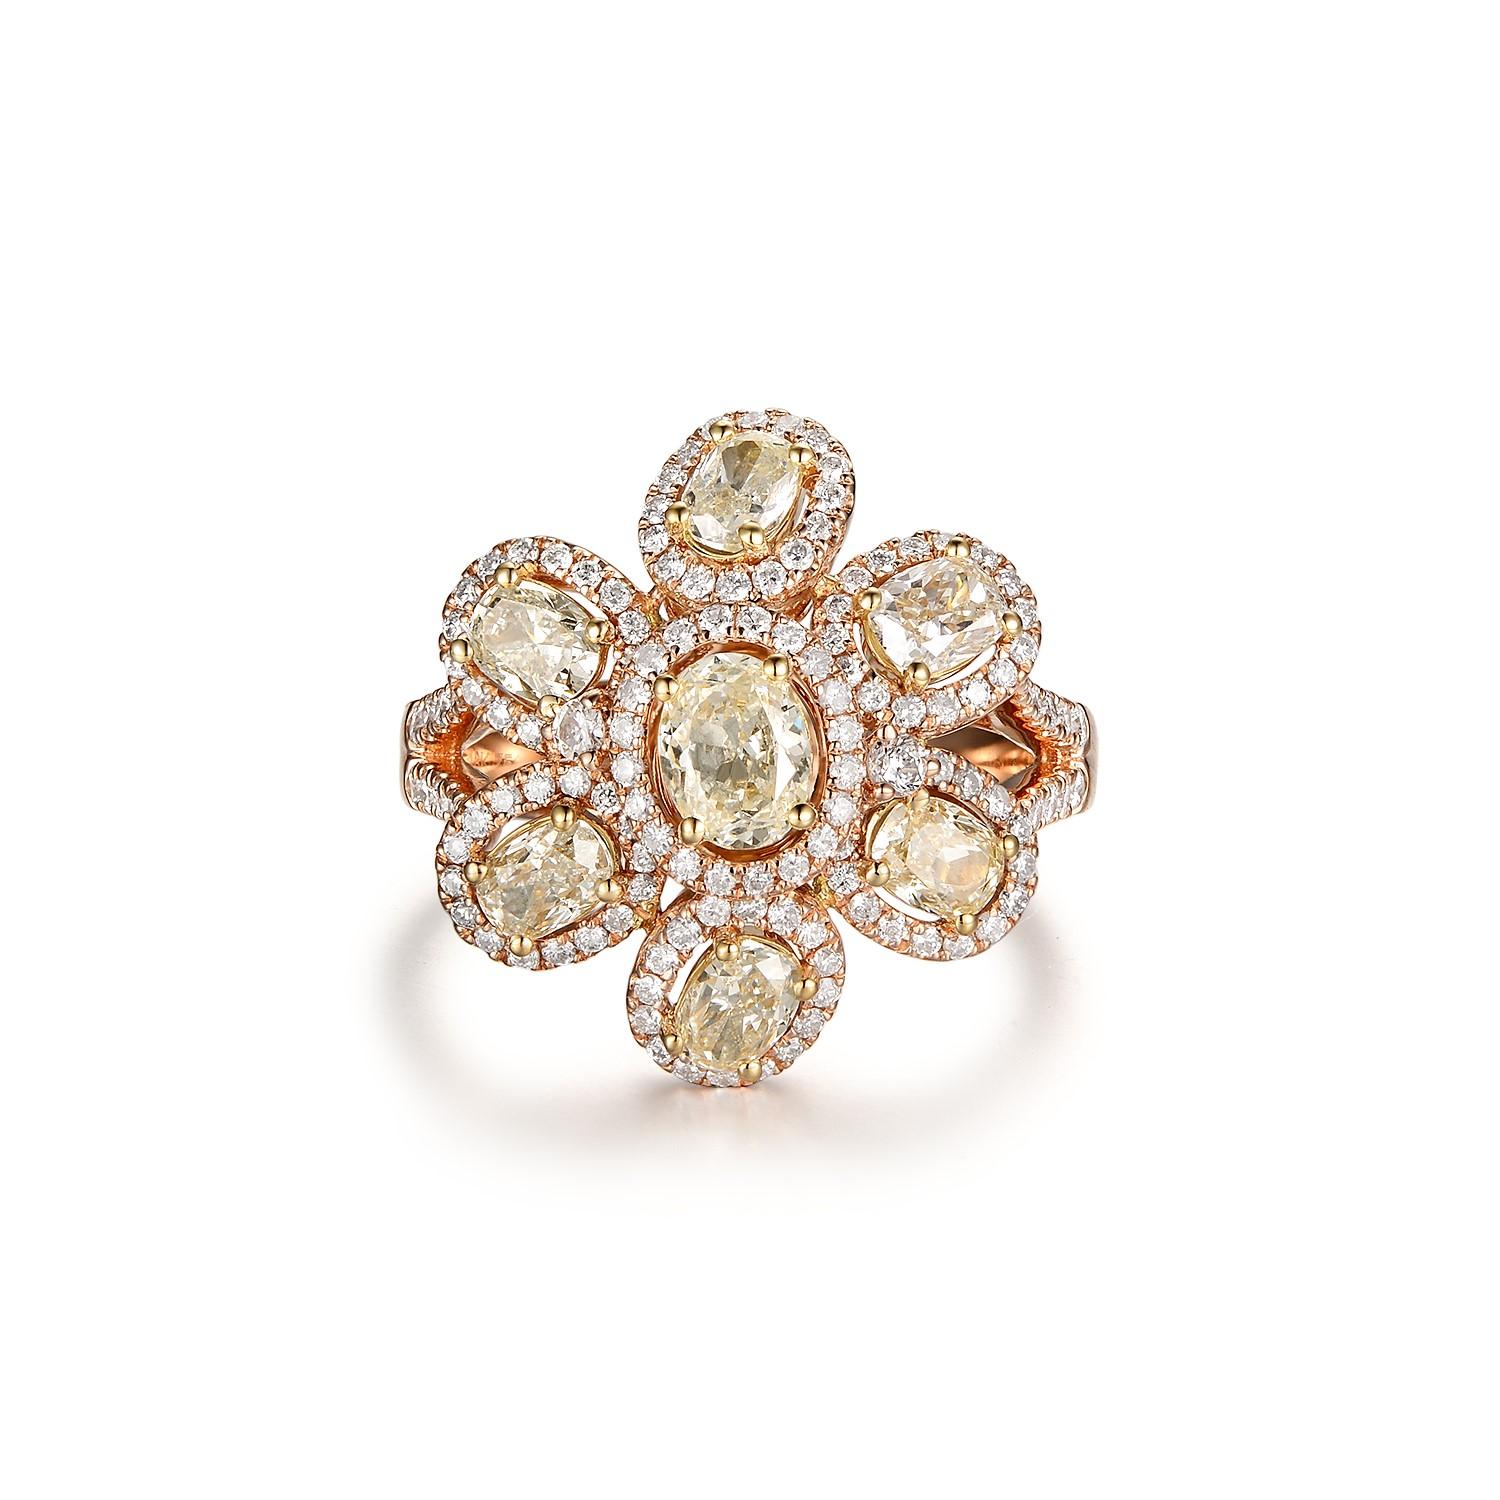 This ring features 7 diamonds weight 1.6 carats and assented with 0.65 carat of smaller diamonds. Ring is set in 18 karat rose gold. 

US 6.5
Resizing is available 
7 Diamonds 1.60 carats
White Round Diamonds 0.65 carat